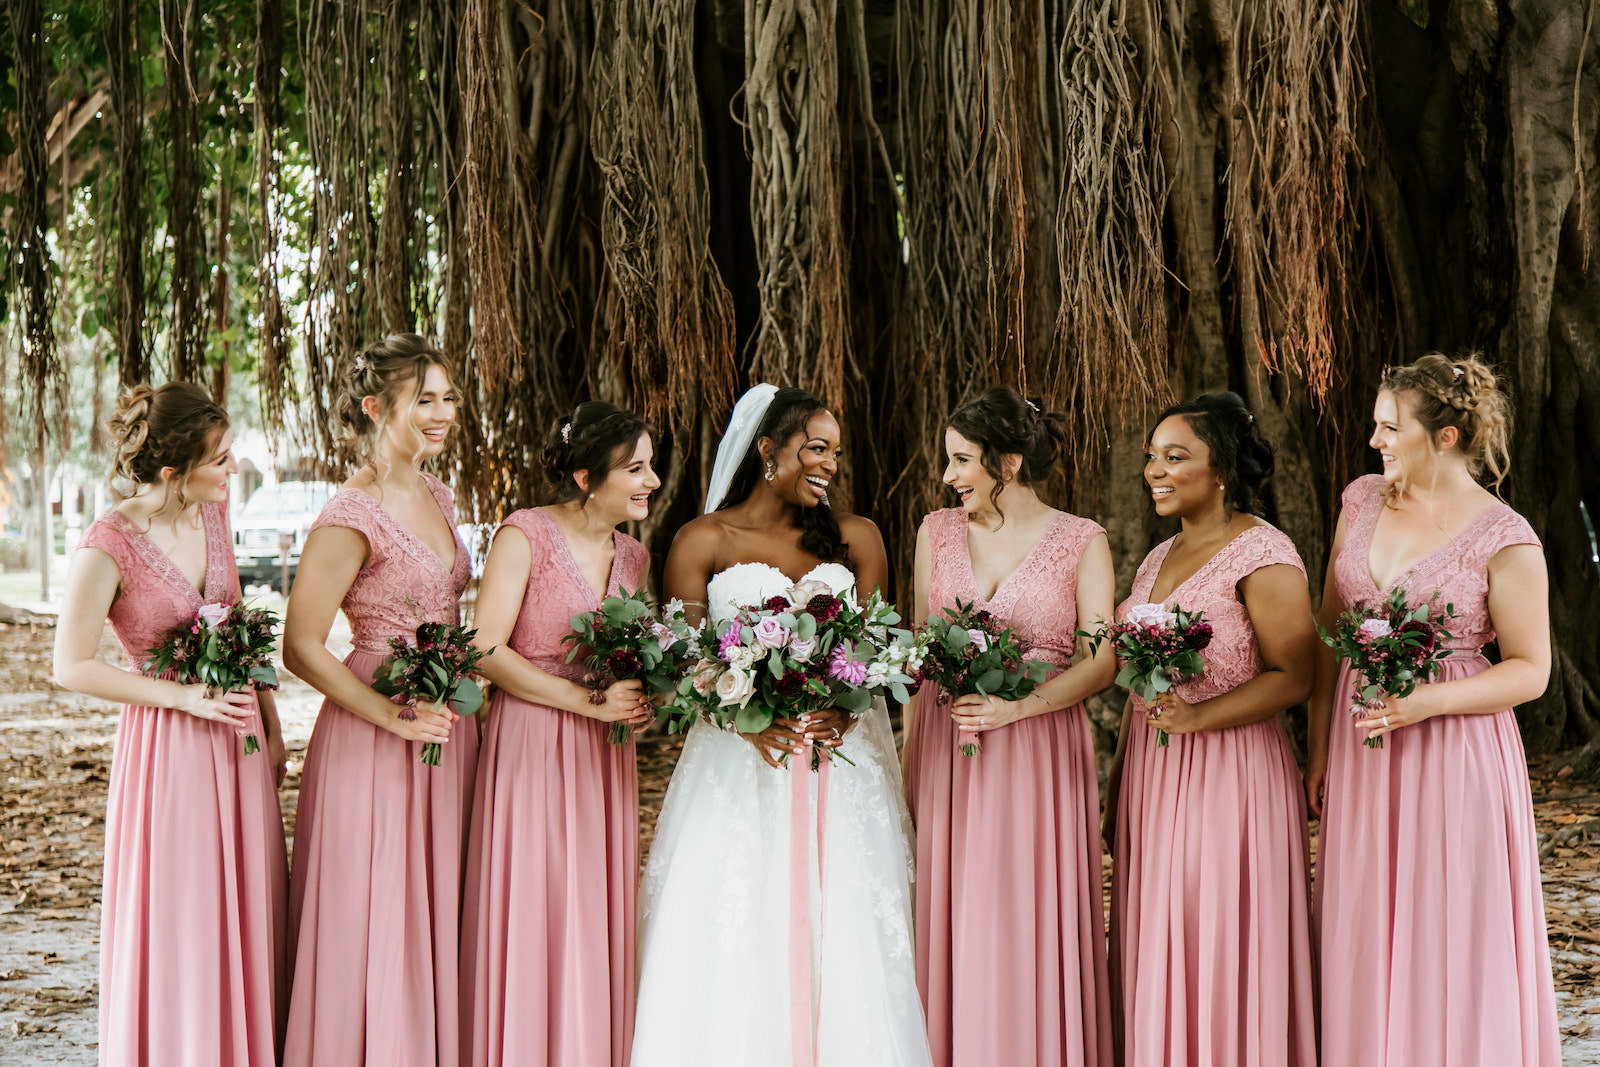 Bride and Bridesmaids Outdoor Portrait Shot in Downtown St. Pete | Blush Pink Dusty Rose Mauve Long Lace and Chiffon Bridesmaid Dresses by JJ's House | Natural Loose Bouquets with Pink and Maroon Roses and Eucalyptus Greenery